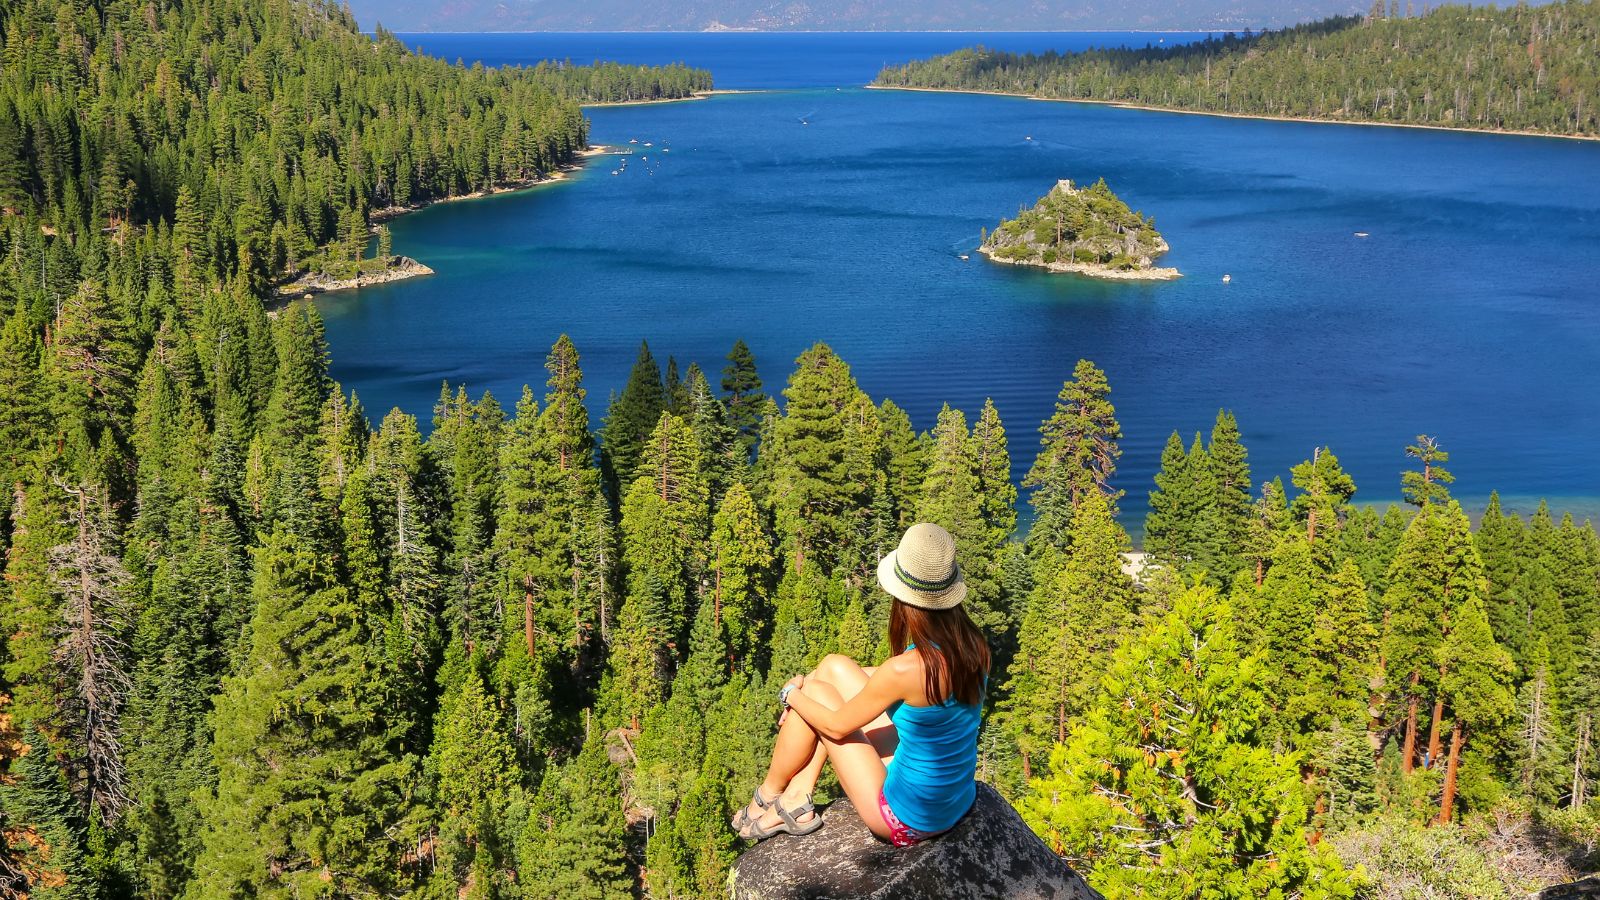 <p>Lake Tahoe, the largest alpine lake in North America, has quickly become one of the most popular tourist destinations for its outrageously gorgeous landscapes. Part of Nevada and California, Lake Tahoe is nestled in the Sierra Nevada Mountains, the second deepest lake in the United States, next to Crater Lake.</p>